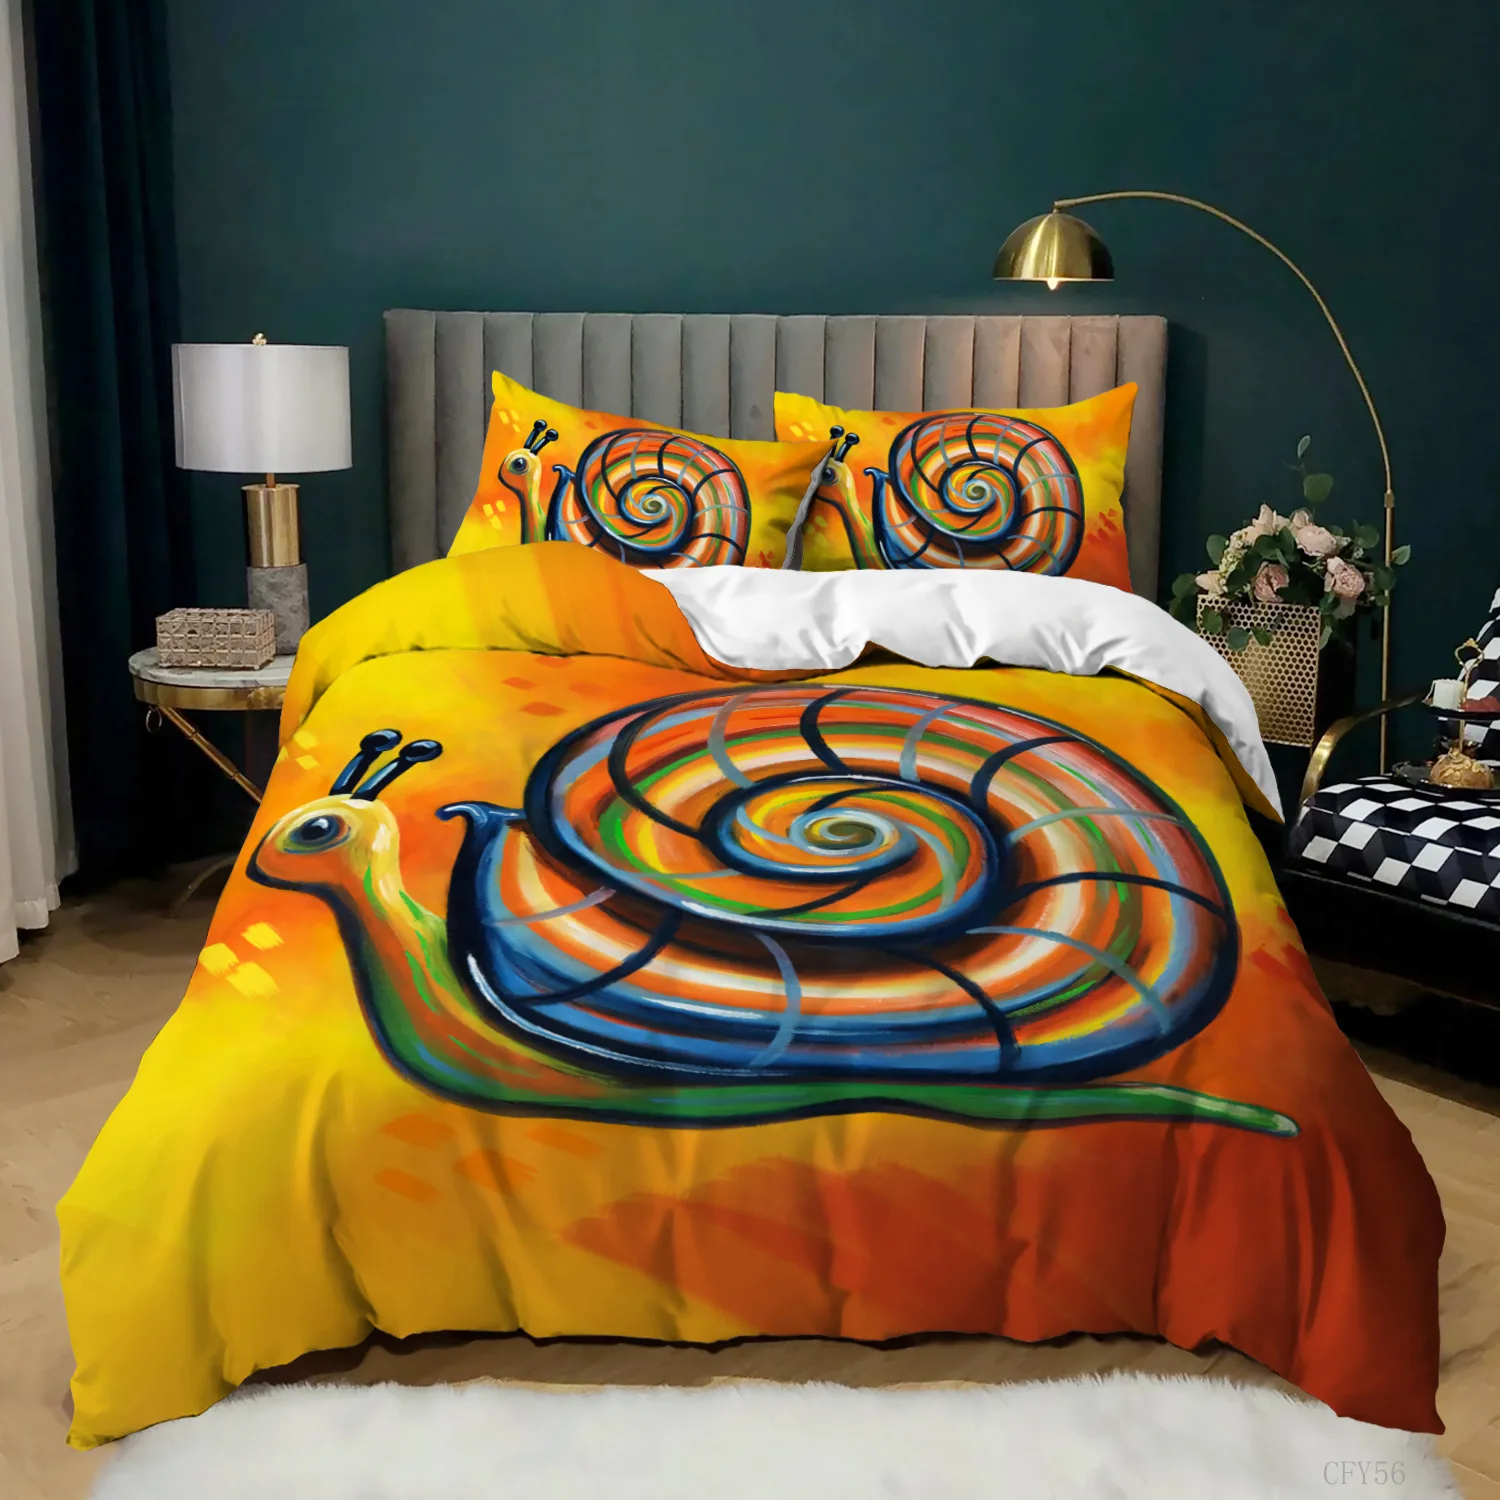 

Snail Duvet Cover Set King Size Reptile Colorful Snail Comforter Cover Twin for Teens Adults Microfiber Animal Theme Bedding Set